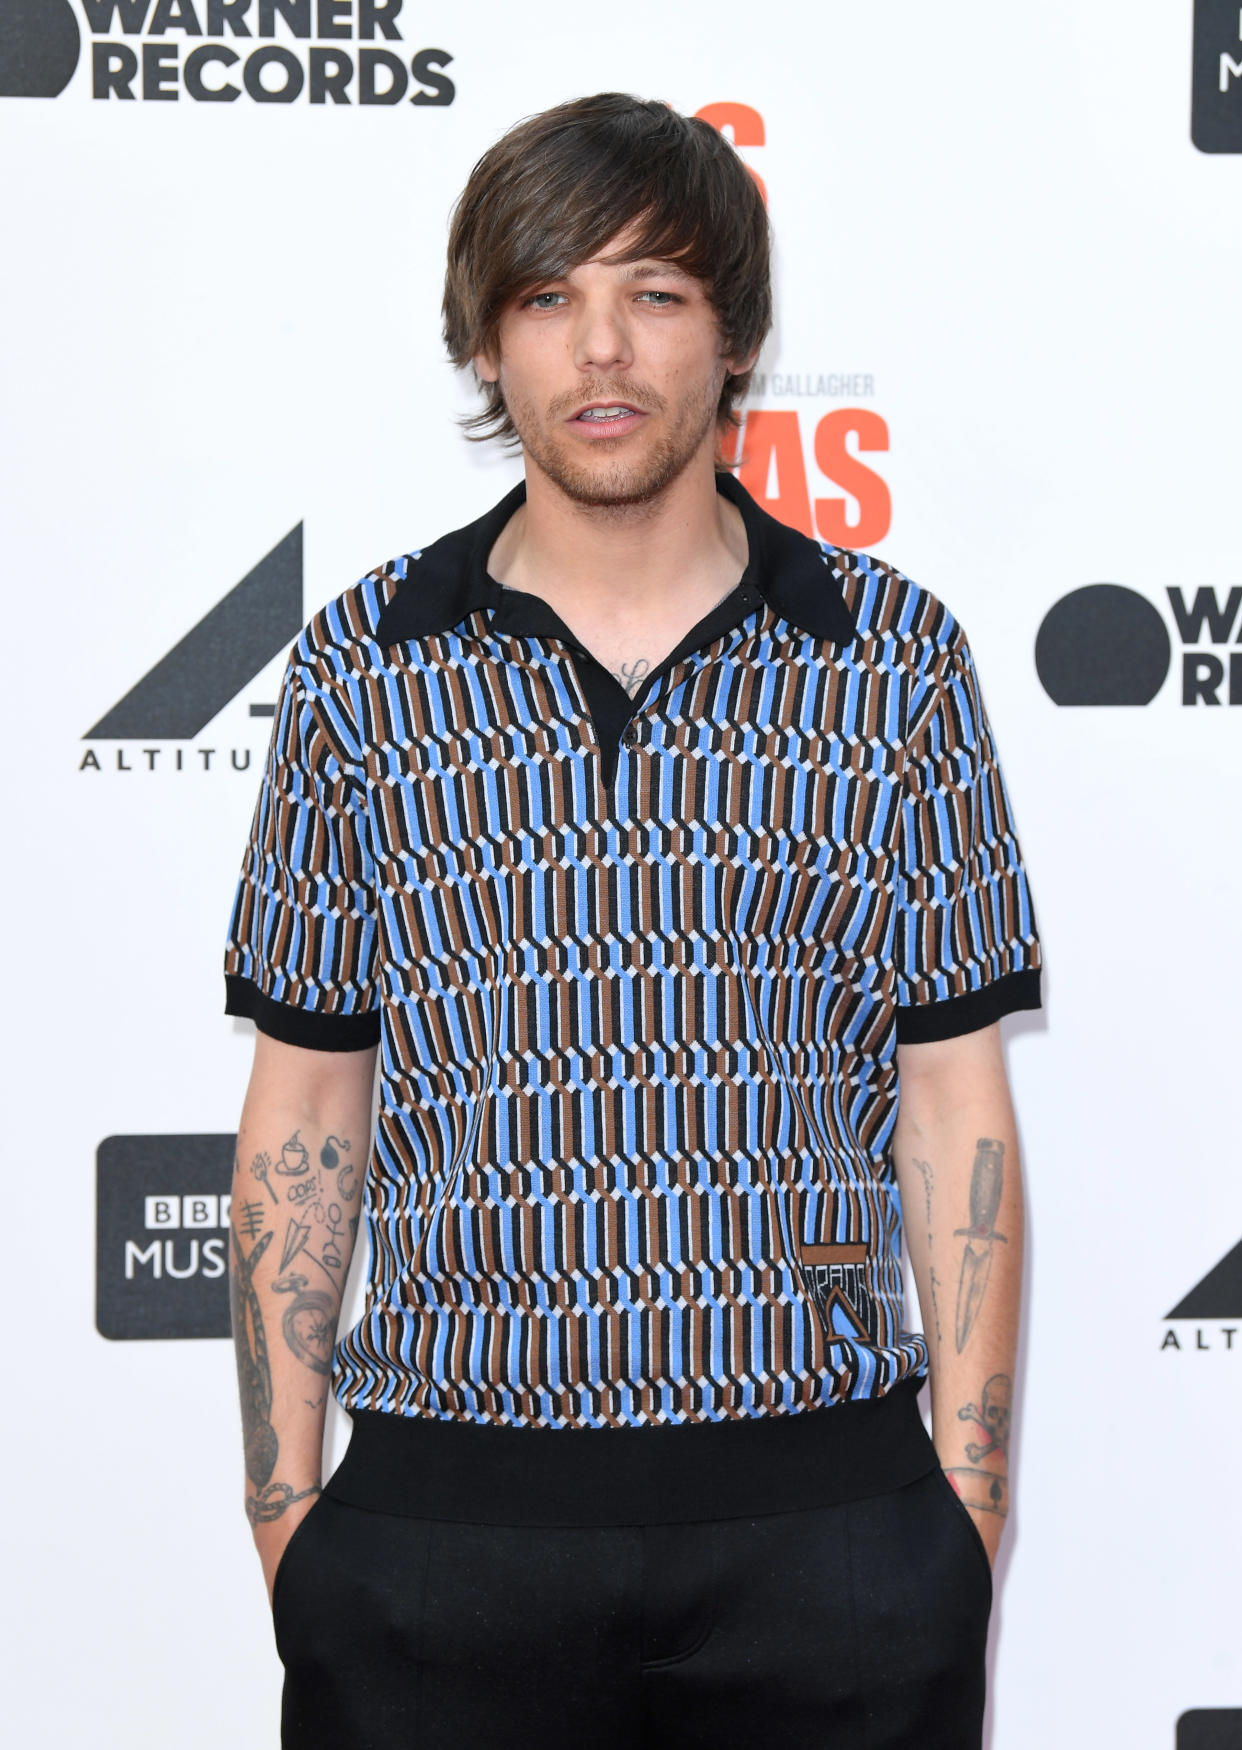 One Direction singer Louis Tomlinson didn't approve of animated sex scene between him and 1D bandmate Harry Styles that aired on HBO TV show, Euphoria.  